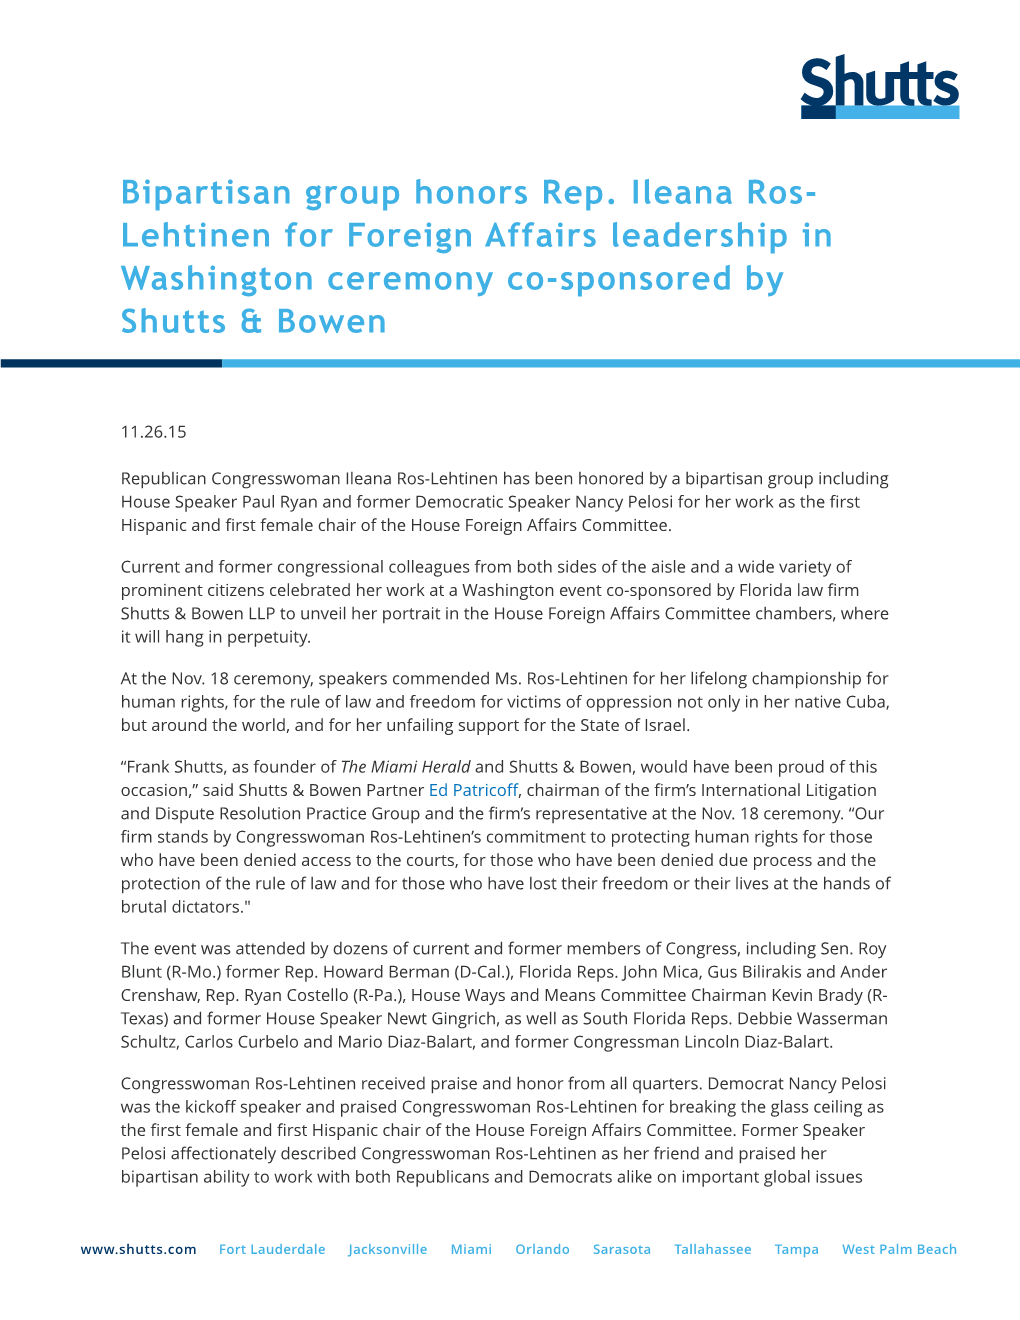 Bipartisan Group Honors Rep. Ileana Ros- Lehtinen for Foreign Affairs Leadership in Washington Ceremony Co-Sponsored by Shutts & Bowen